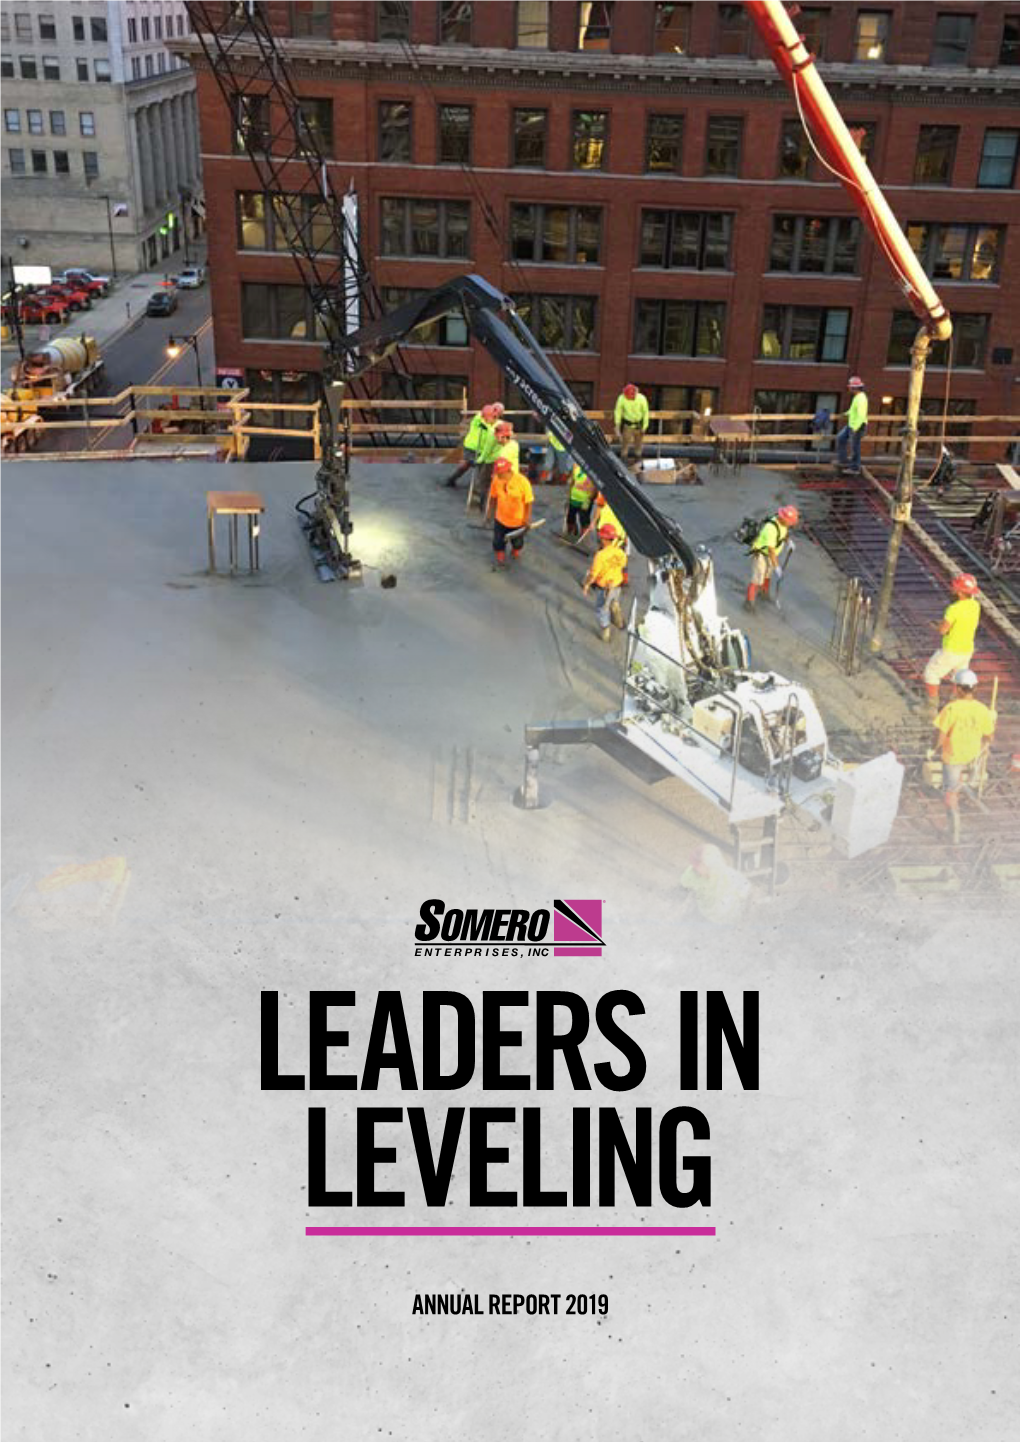 ANNUAL REPORT 2019 Somero® Provides Industry-Leading Concrete-Leveling Equipment, Training, Education and Support to Customers in Over 90+ Countries